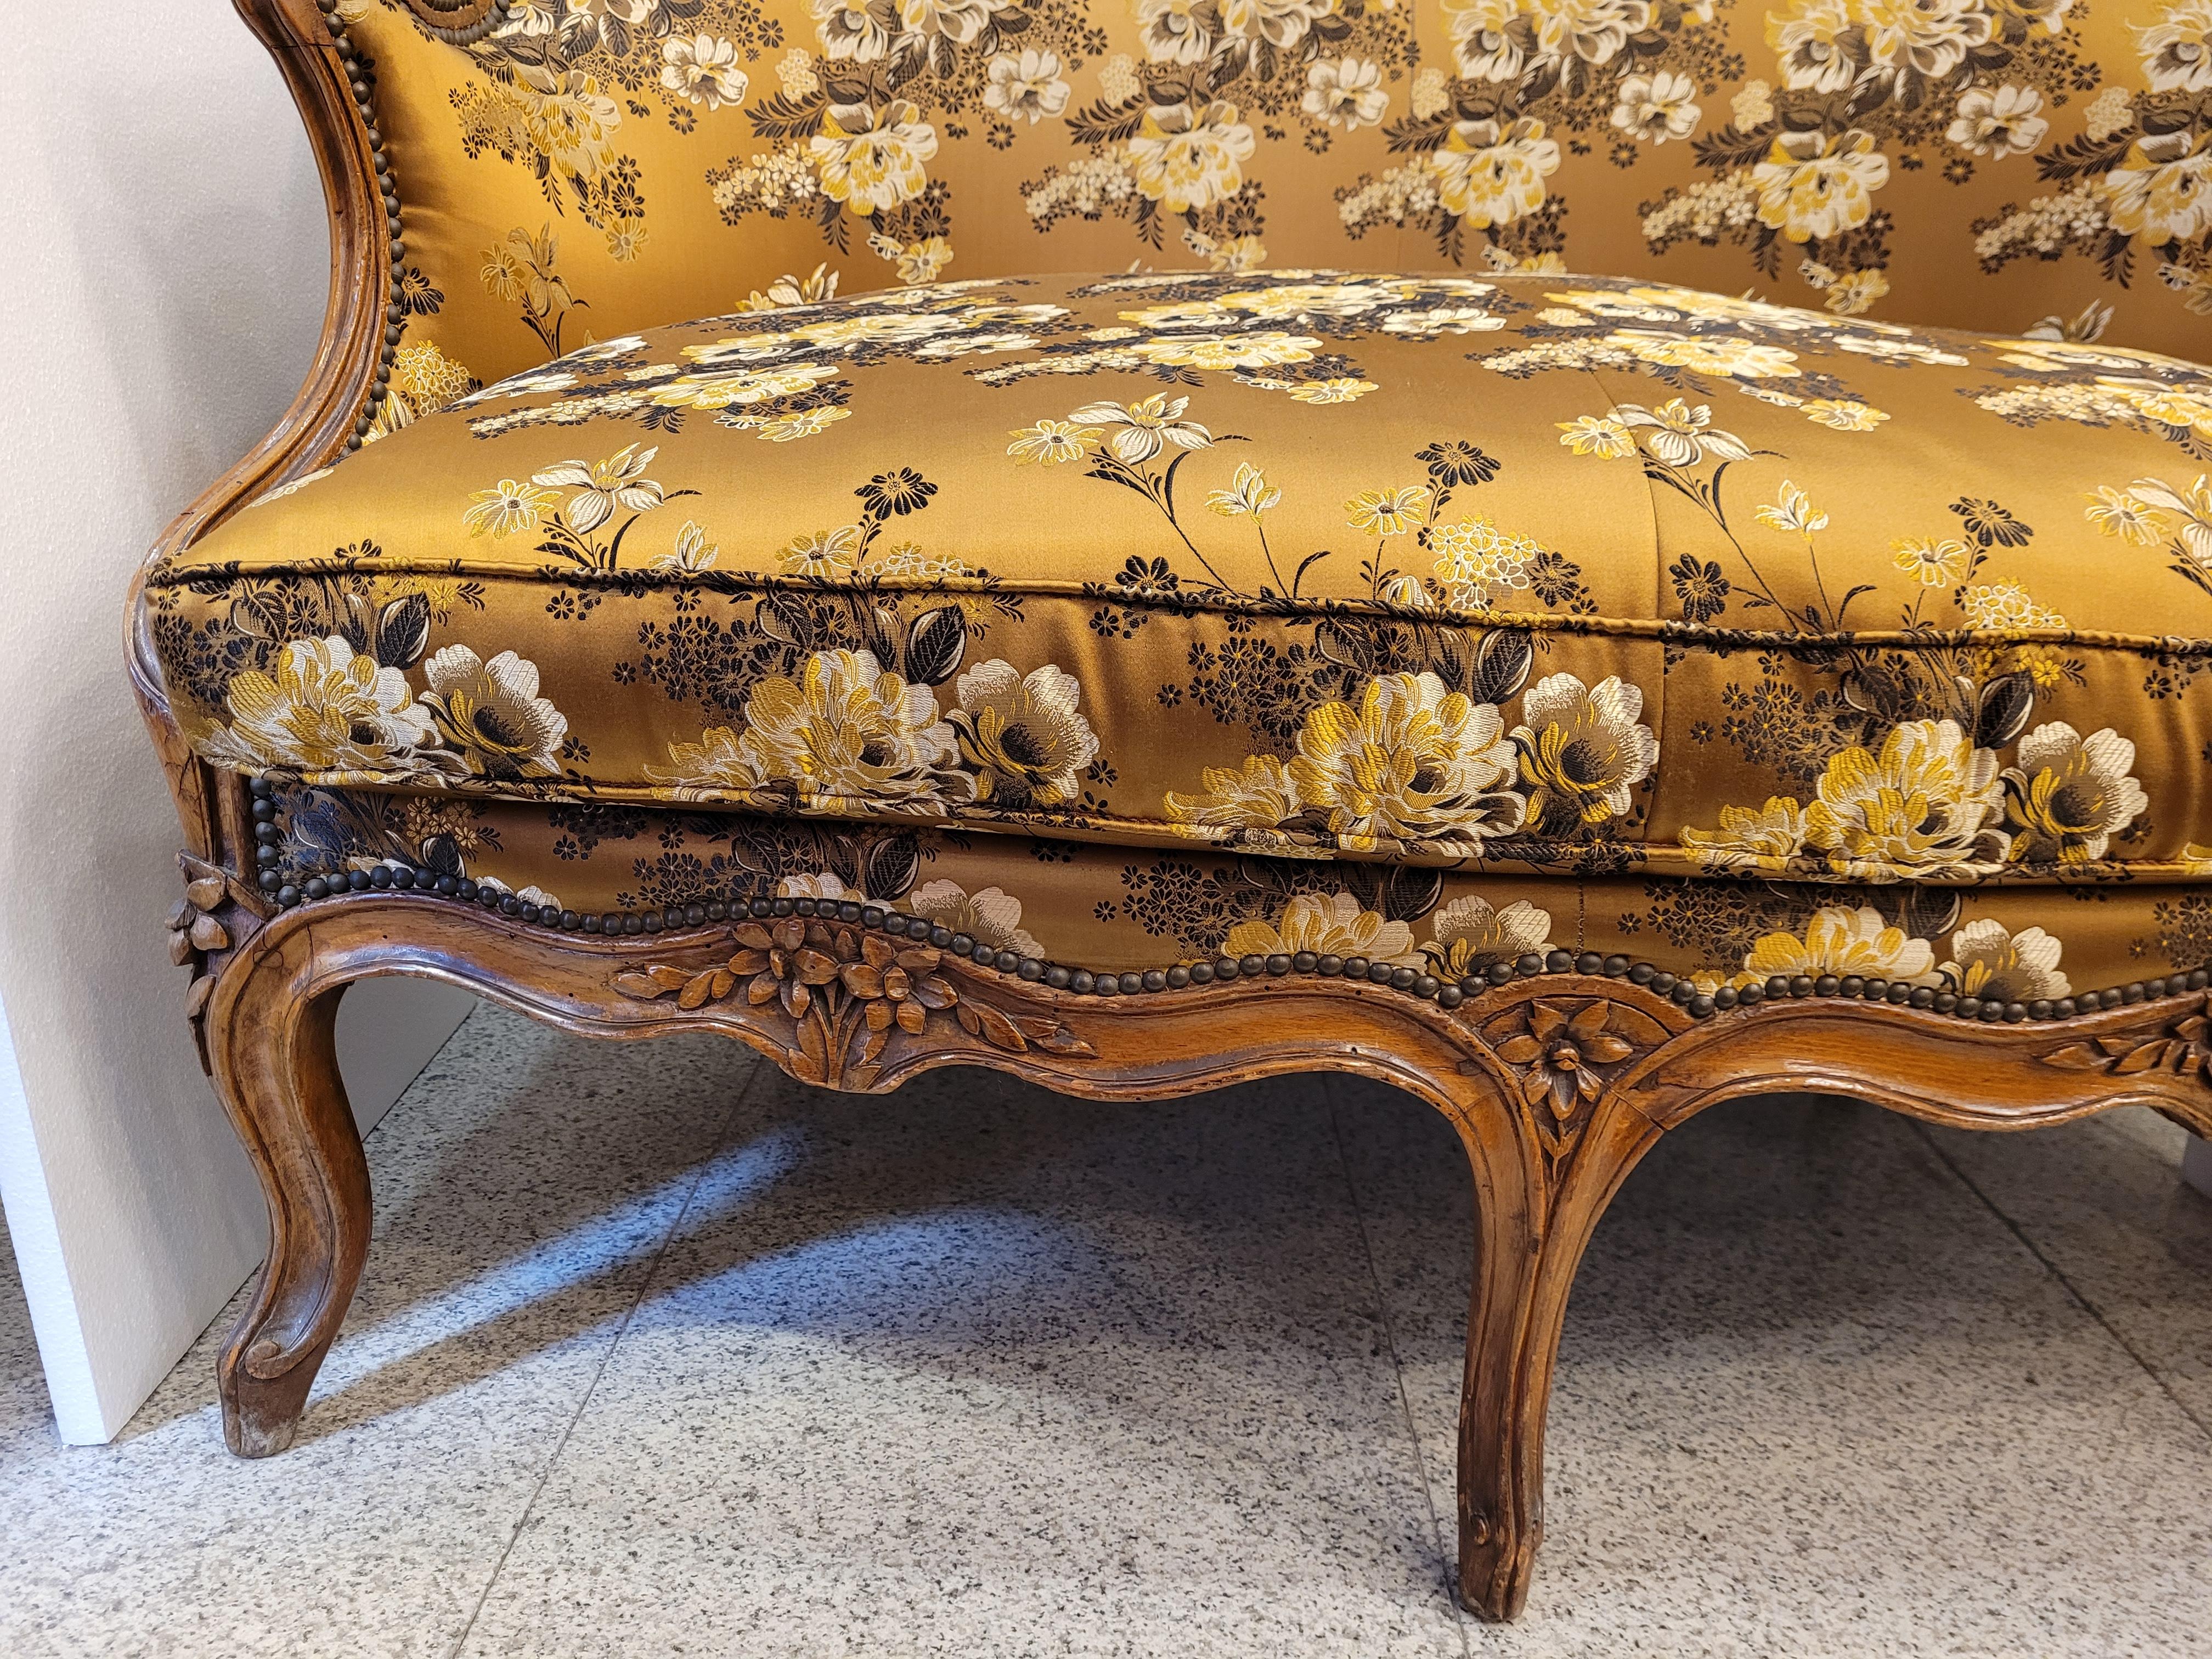 Hand-Crafted French Sofa -Canape Luis xv Gold Colour, Wood and Floral Silk